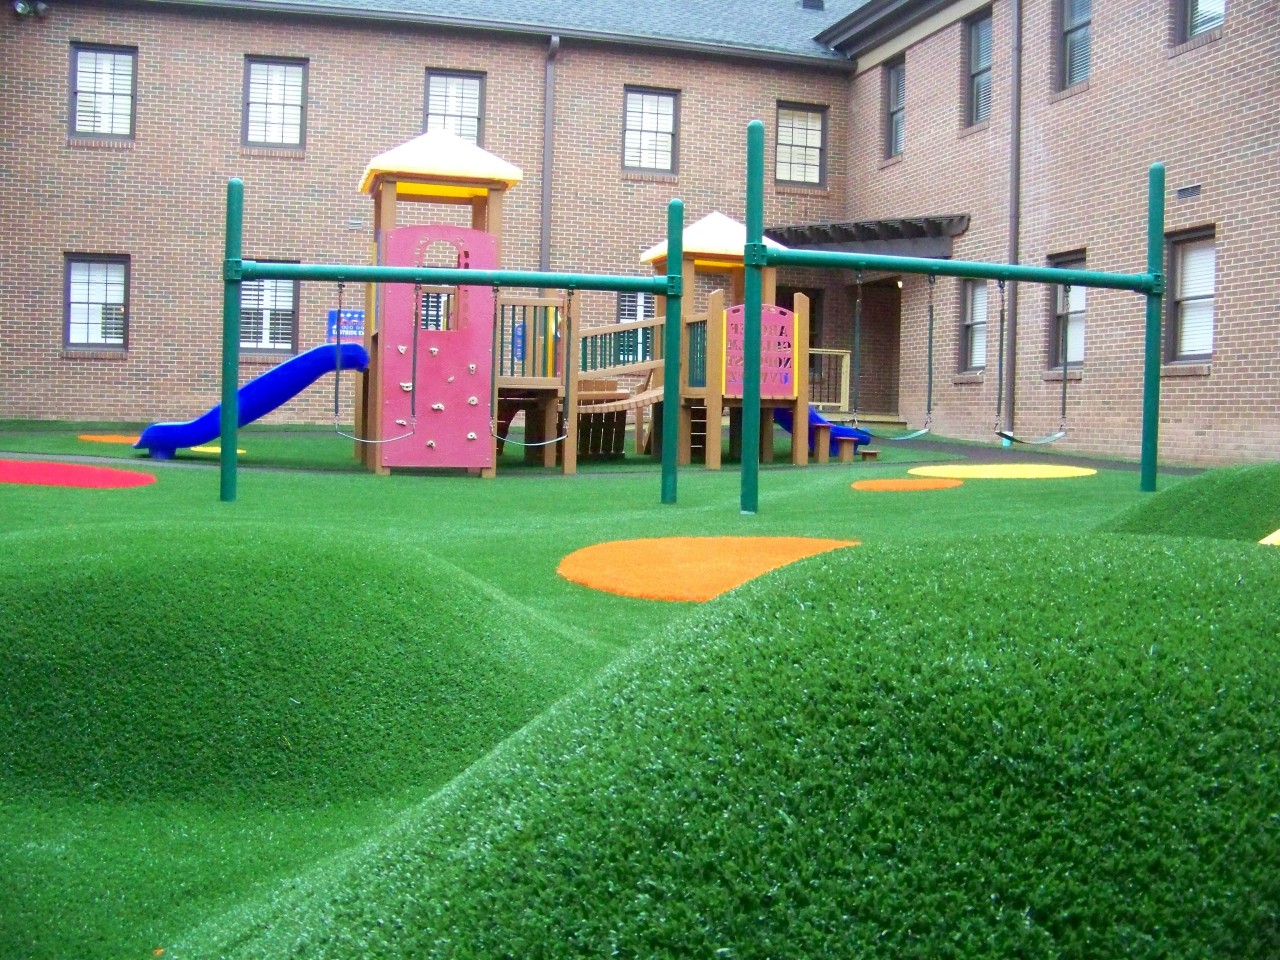 Hilly artificial turf playground by Southwest Greens Flagstaff